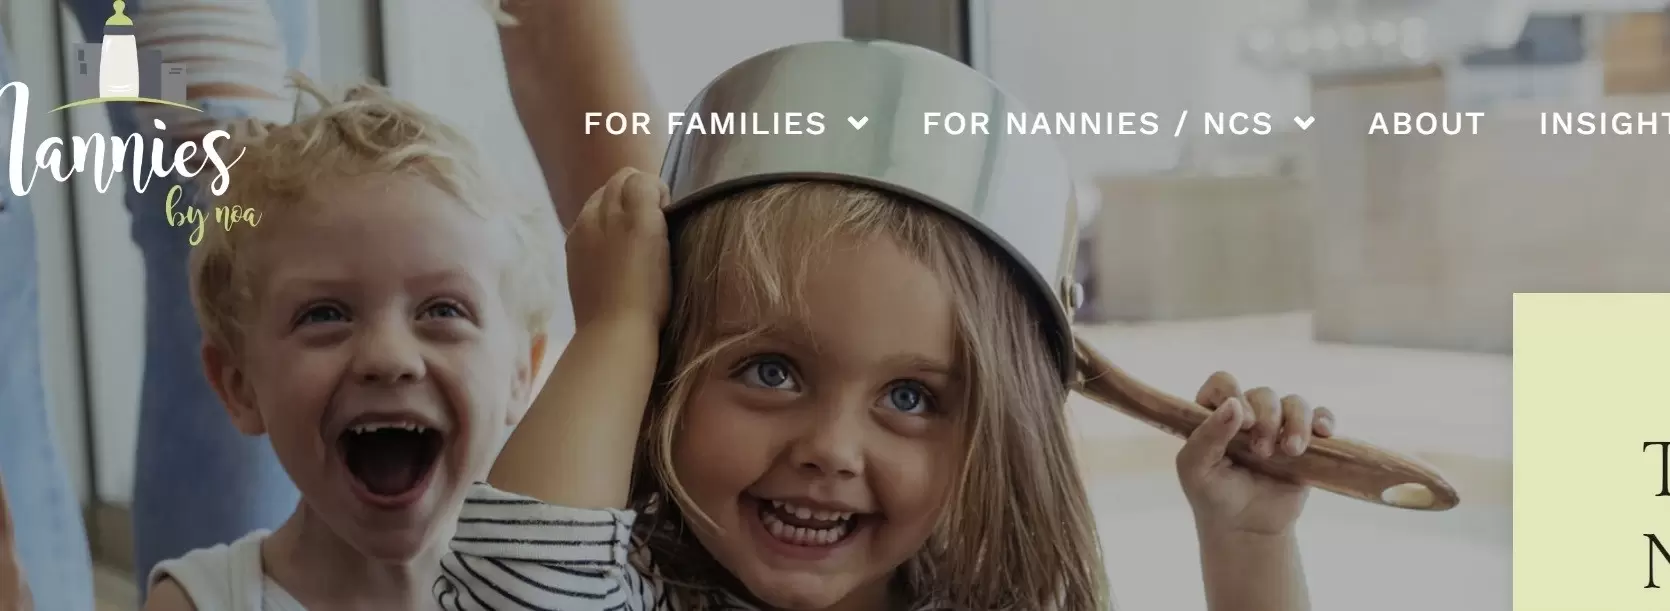 Nannies by Noa company profile and reviews